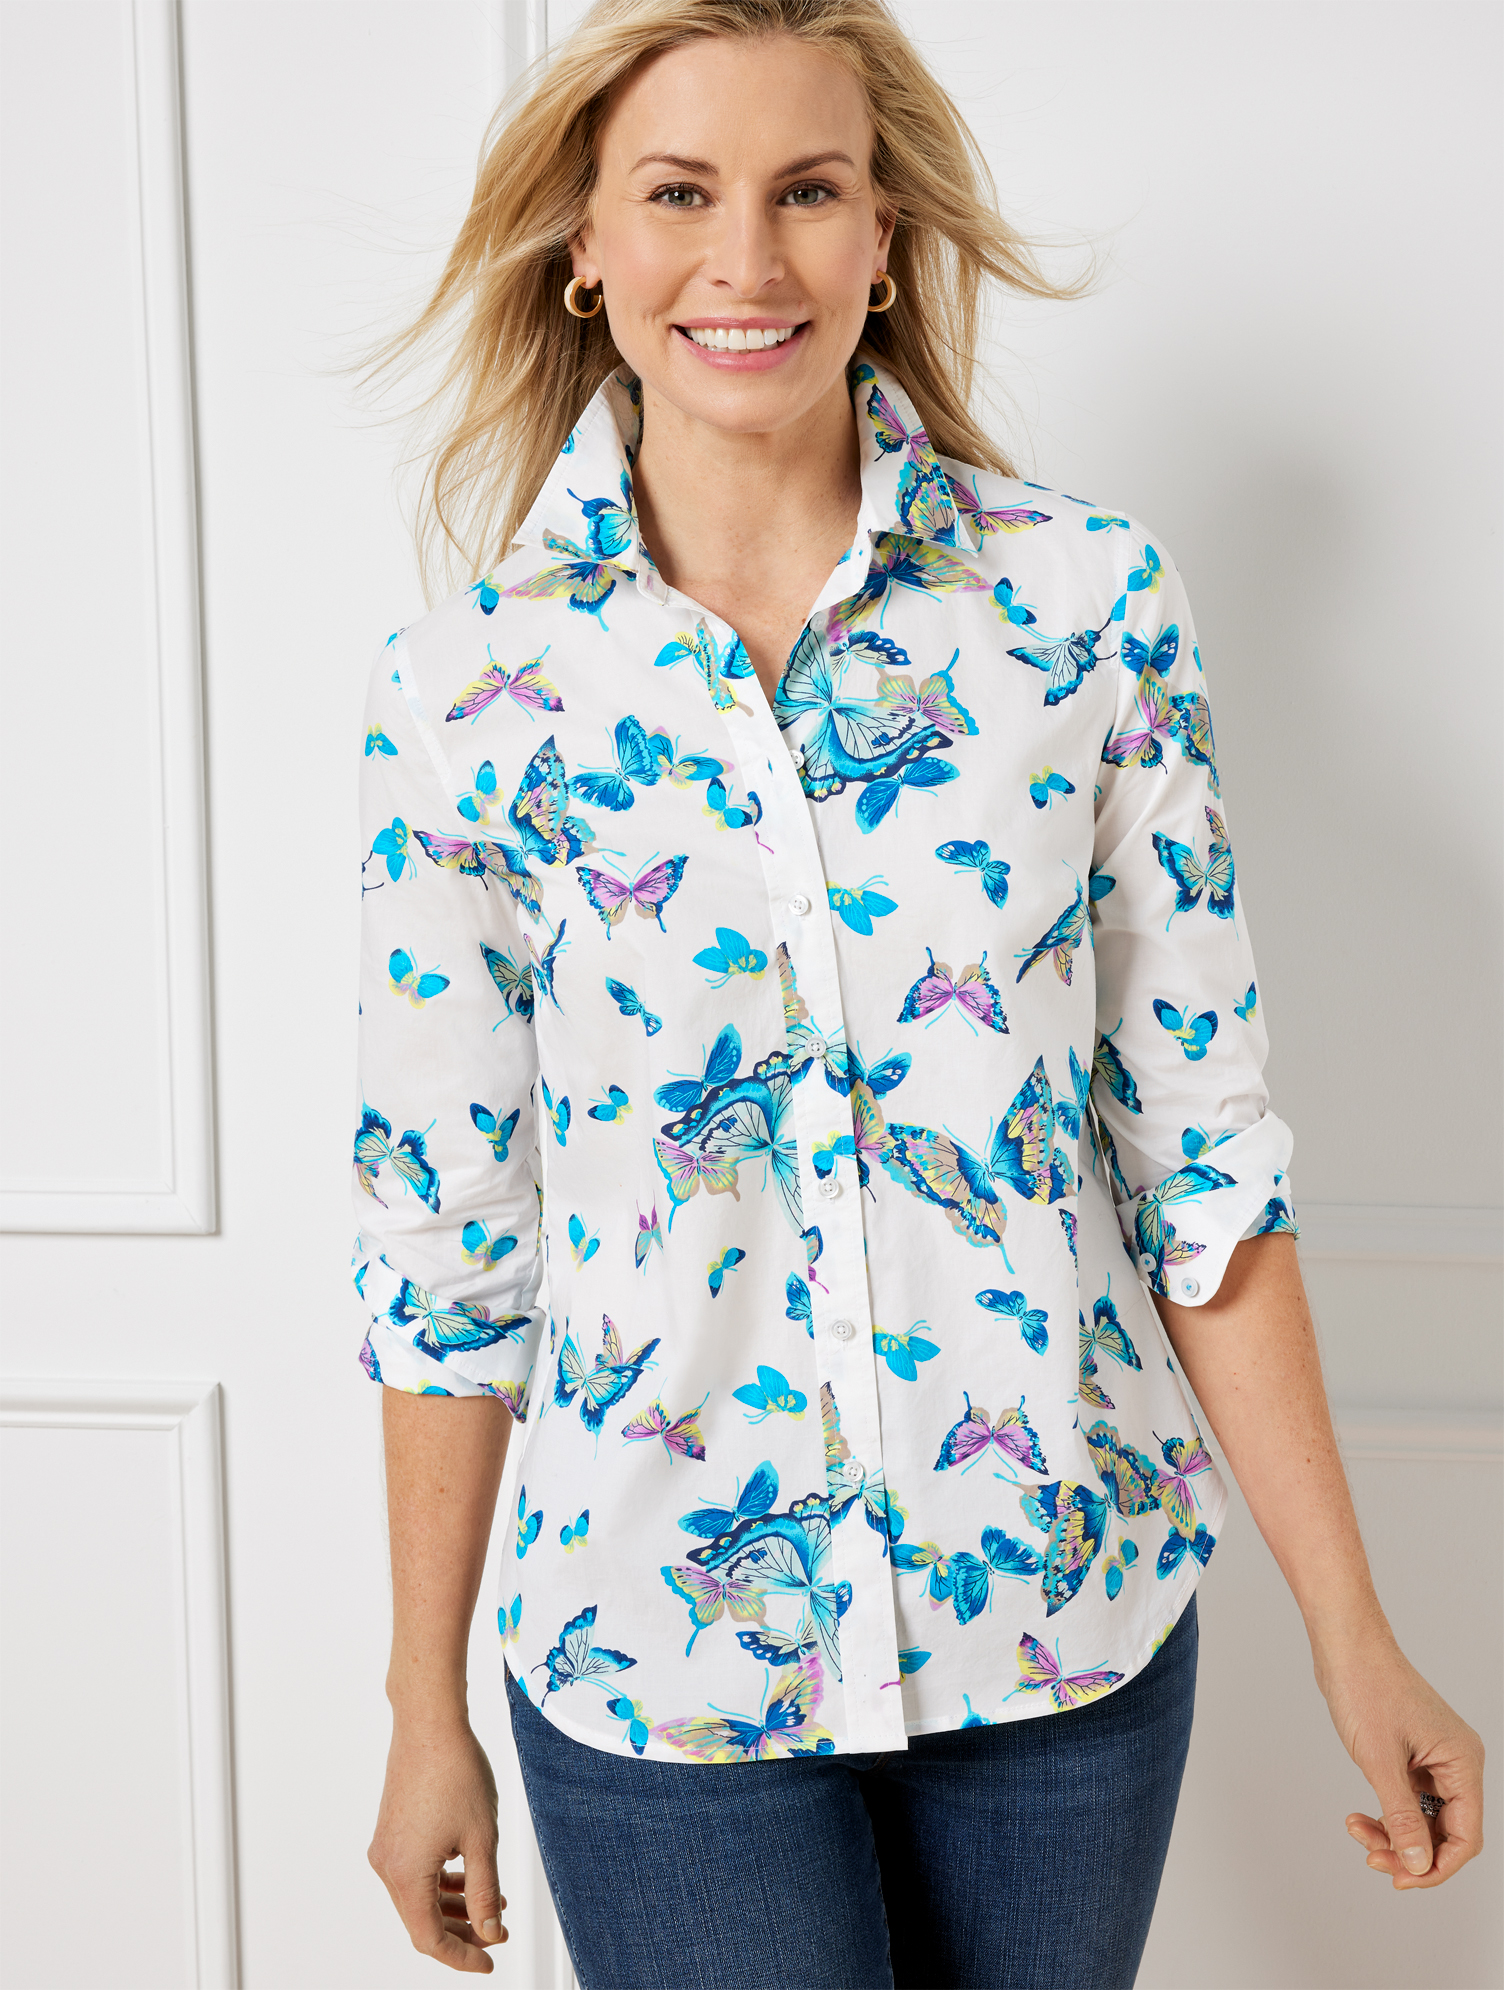 Talbots Cotton Button Front Shirt - Exquisite Butterfly - White